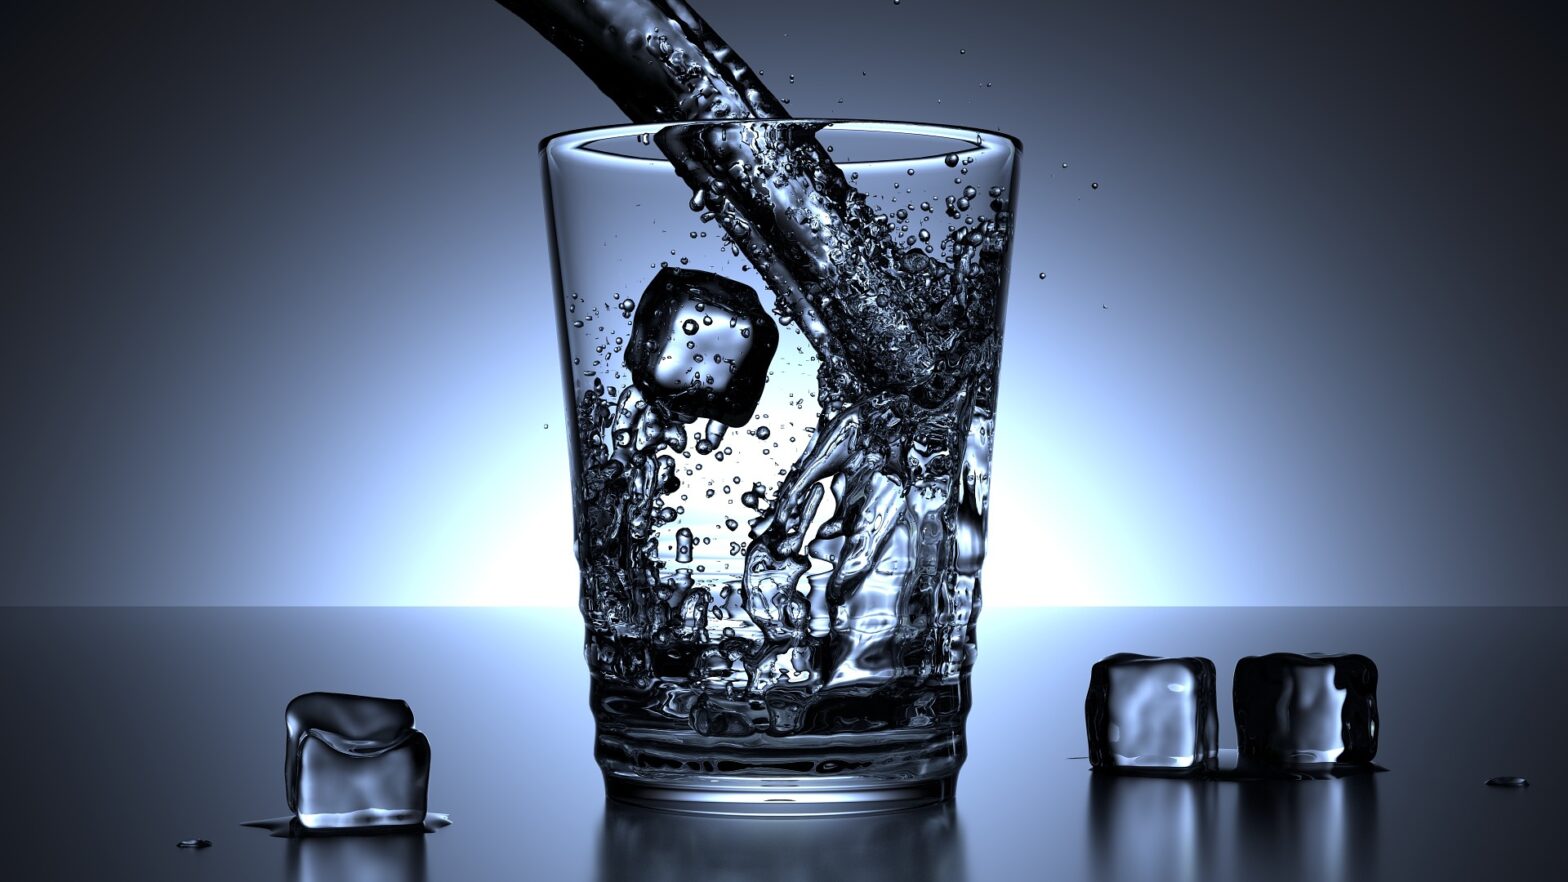 Refilling a glass of water.